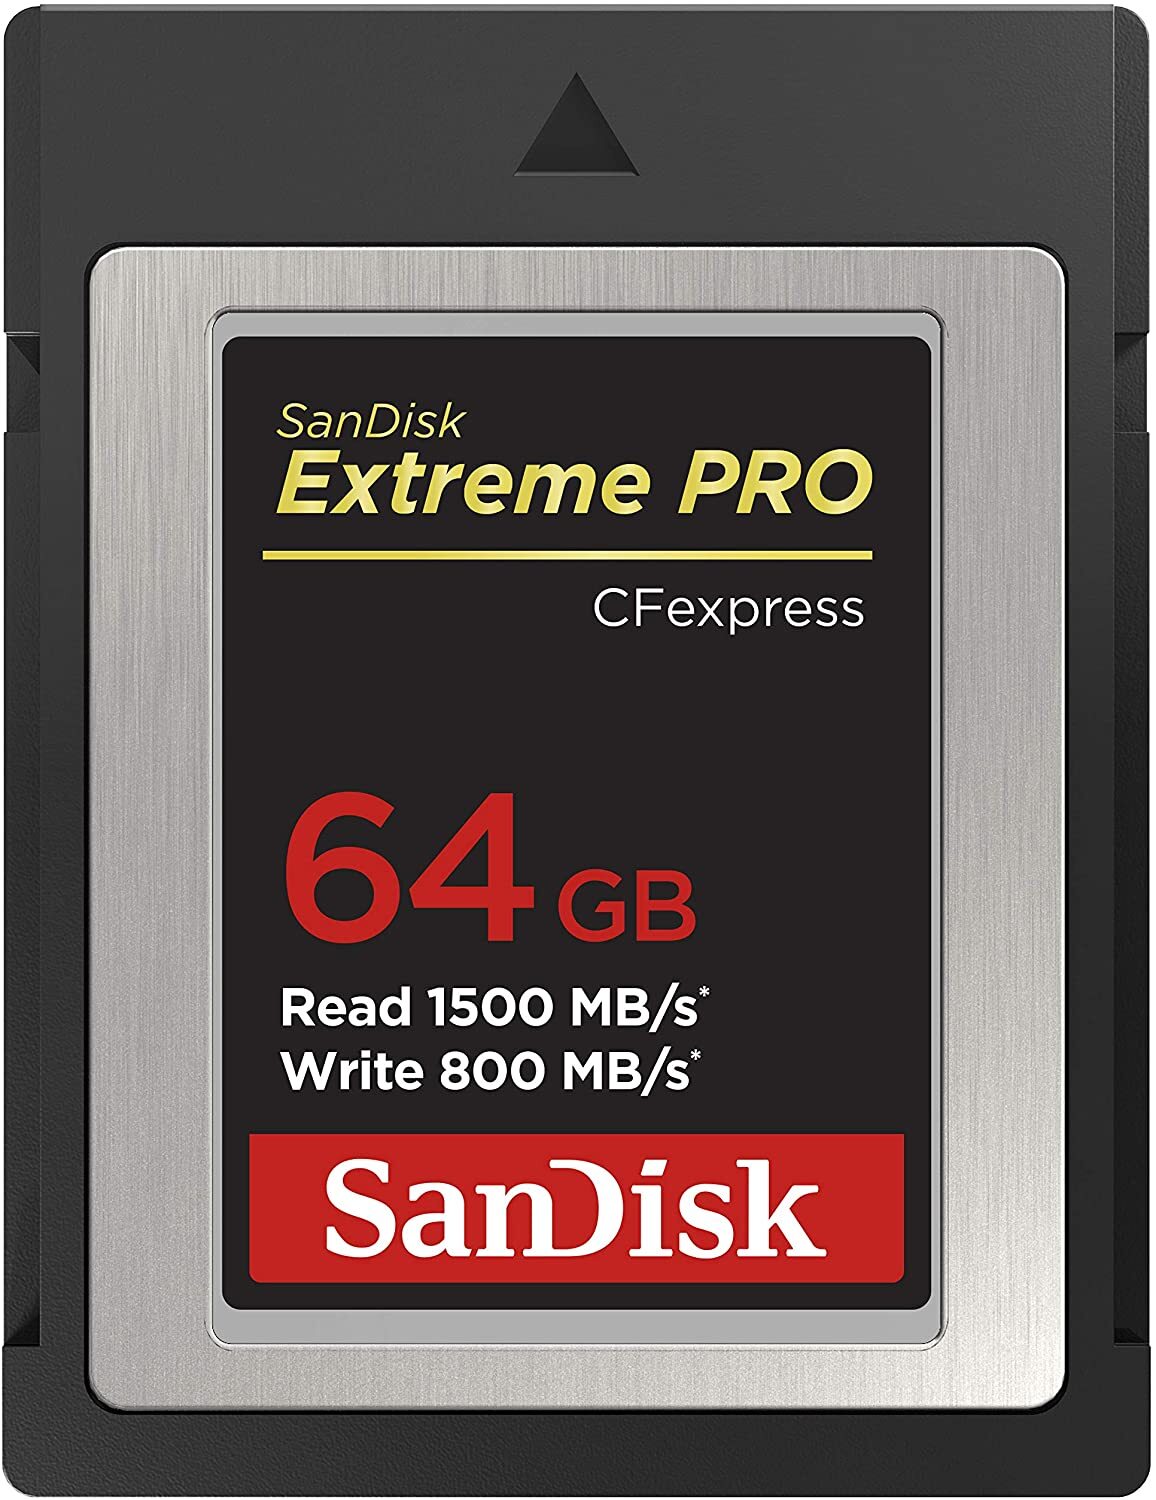 CF Card SanDisk Extreme PRO 64 GB CFexpress Type B Card for 4K VIDEO 1500MB/s